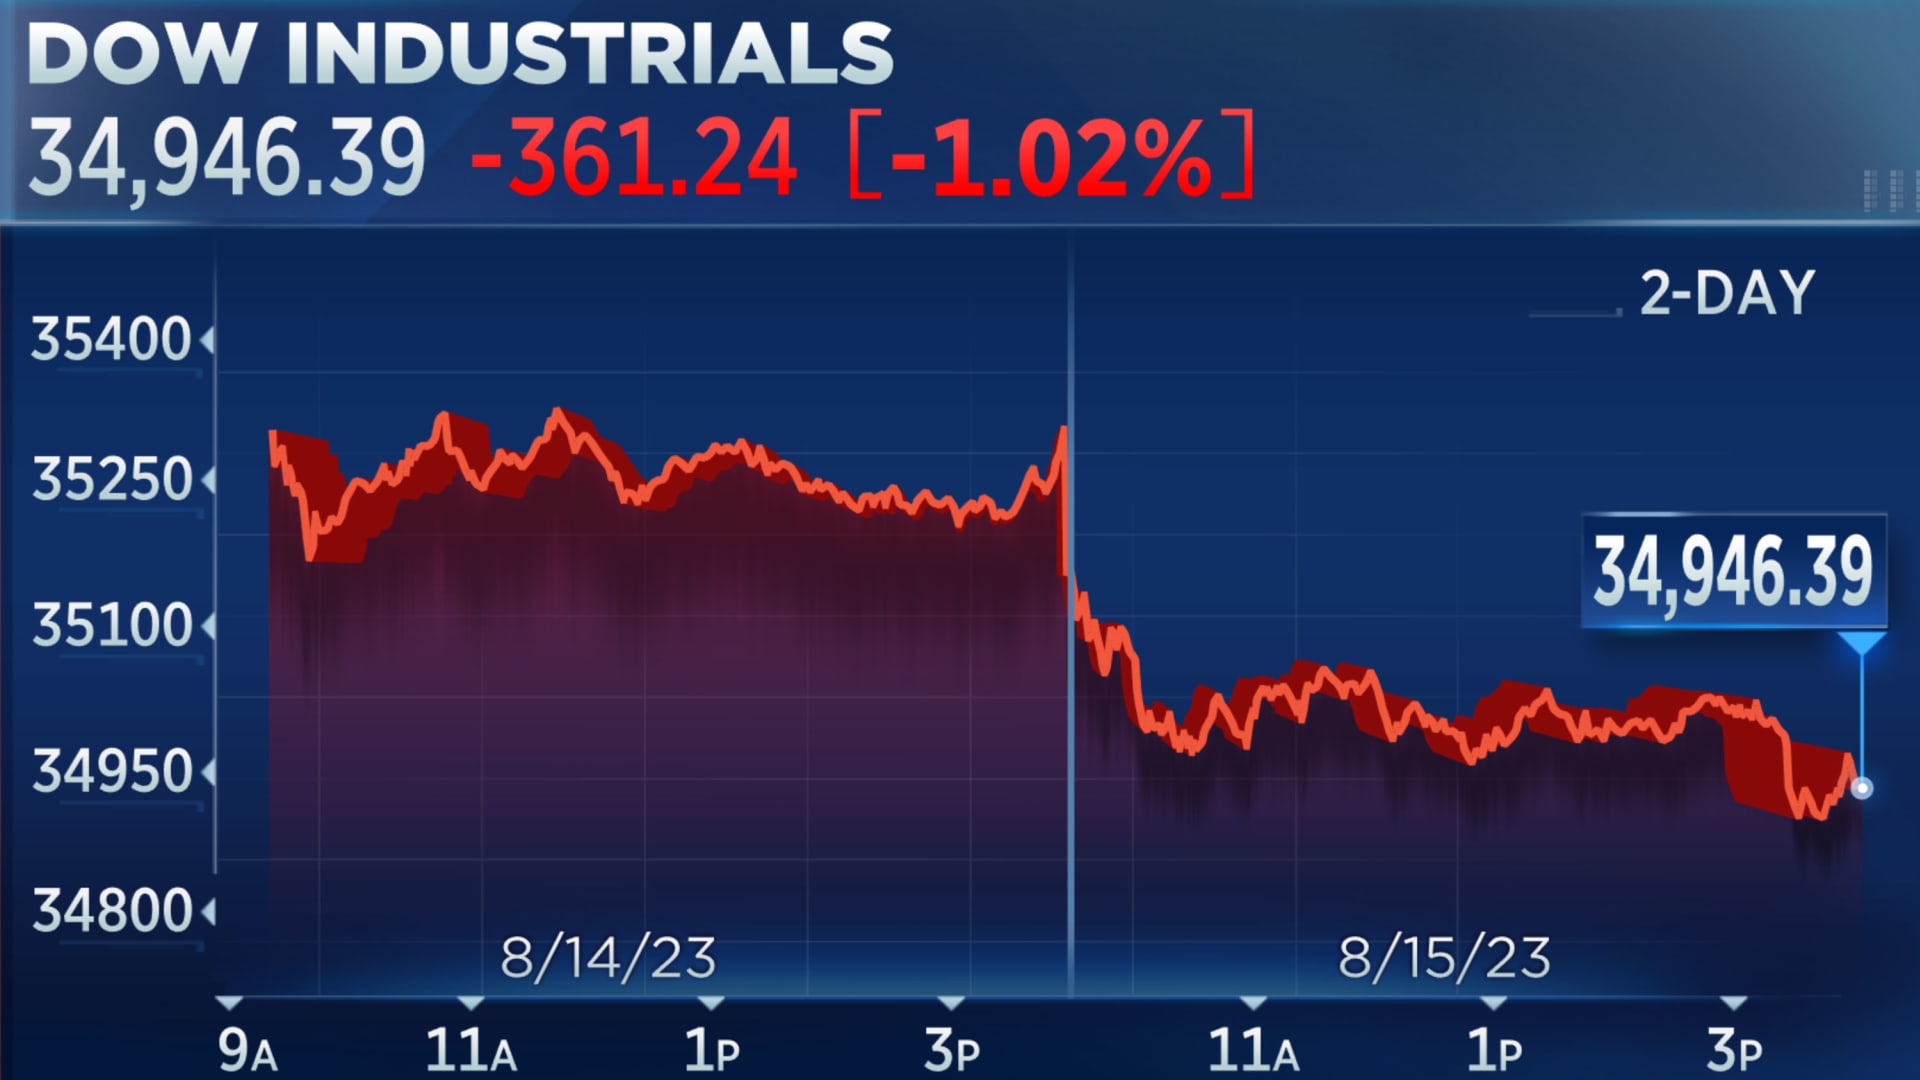 Dow slides more than 300 points, breaking a 3-day win streak, as bank names tumble: Live updates